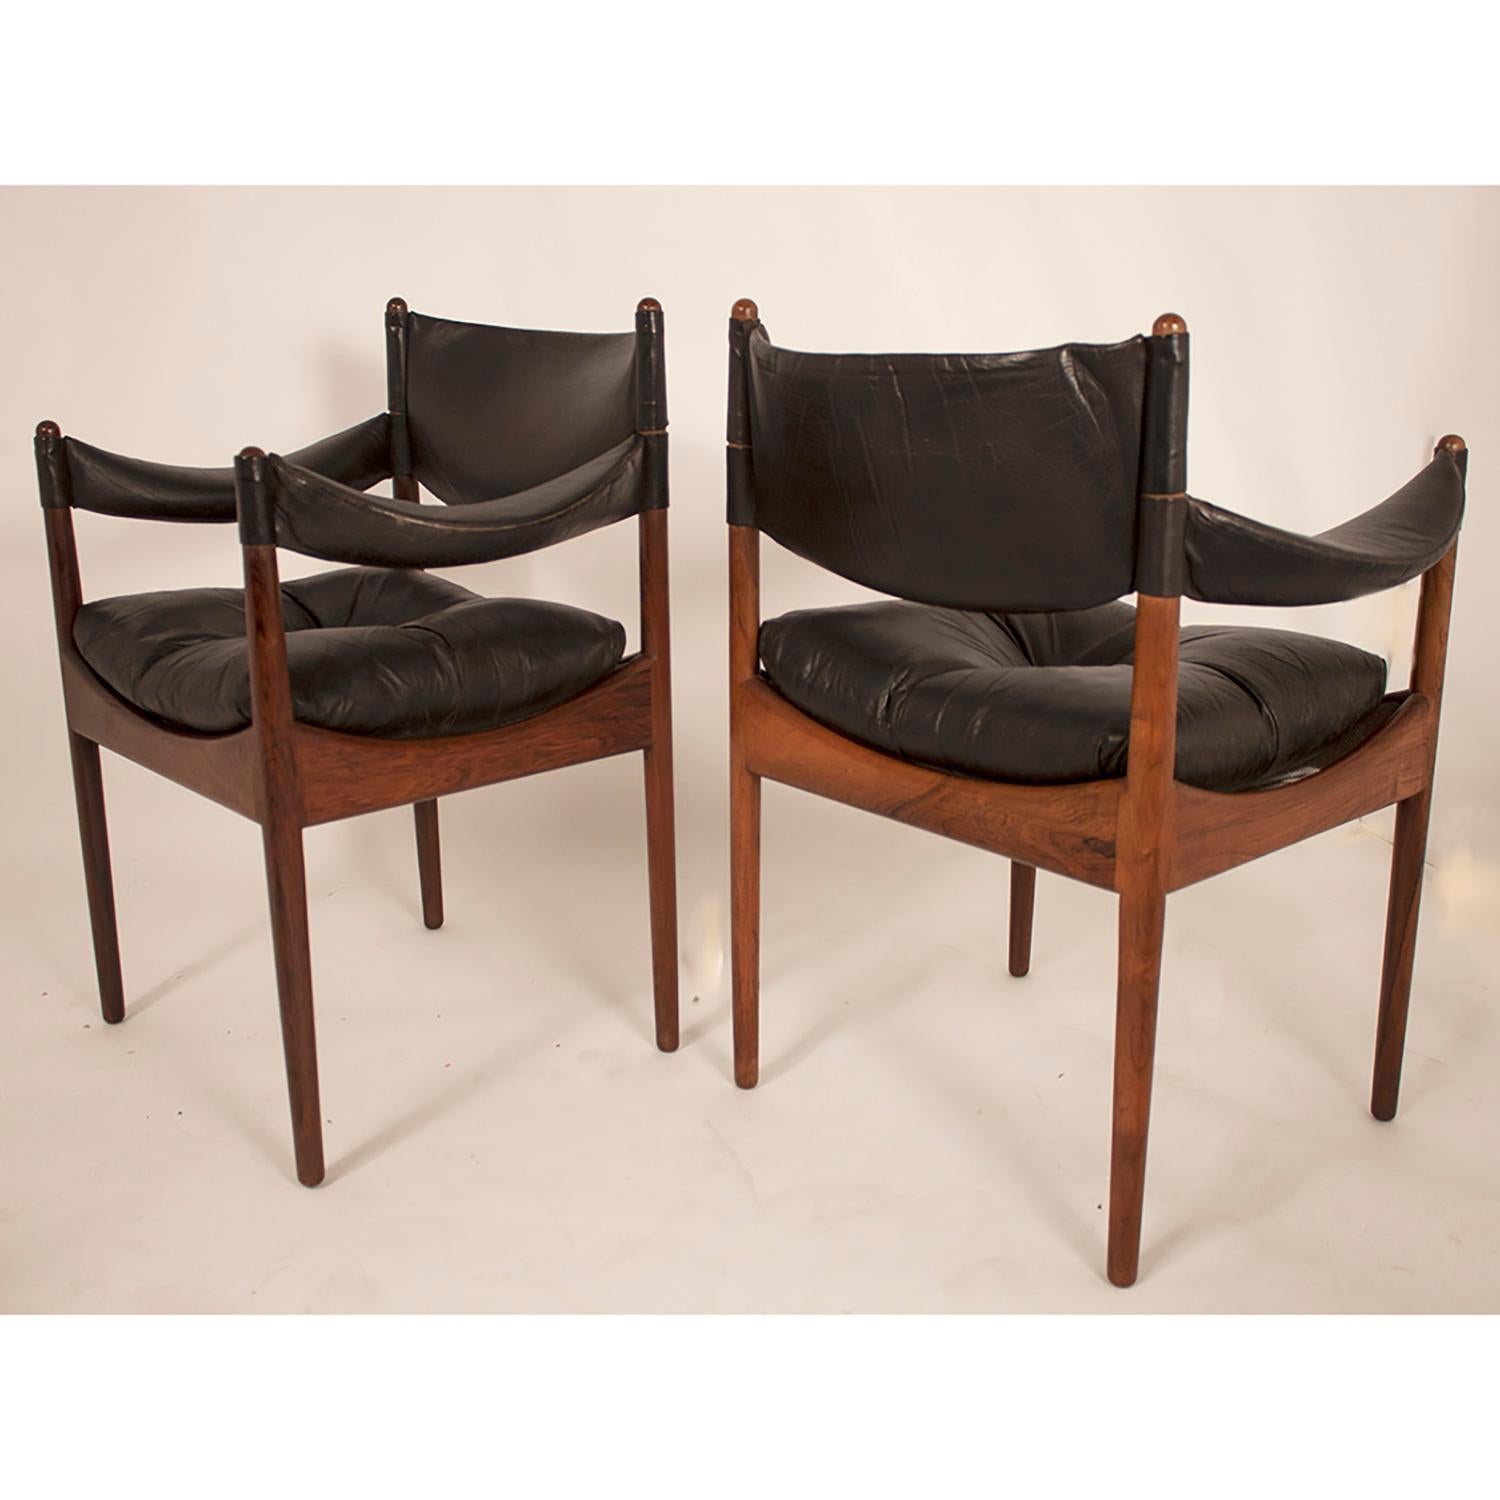 Kristian Vedel midcentury black leather Danish set four armchairs for Soren Willadsen.
The table is not available.